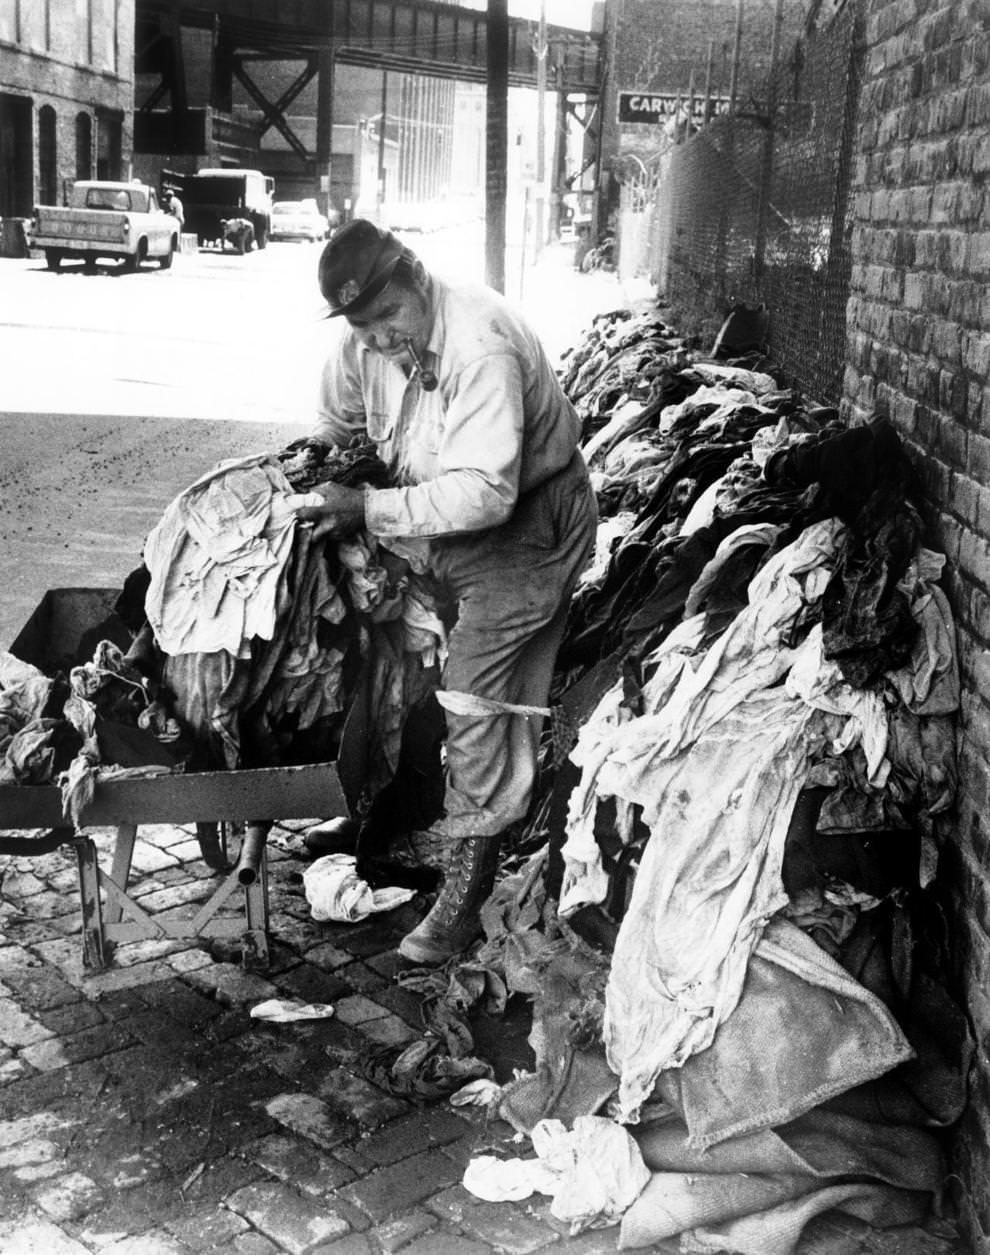 William H. Morse removed damaged clothing from the Clarence Cosby Inc. scrap metal firm on East Cary Street in Richmond, 1962.